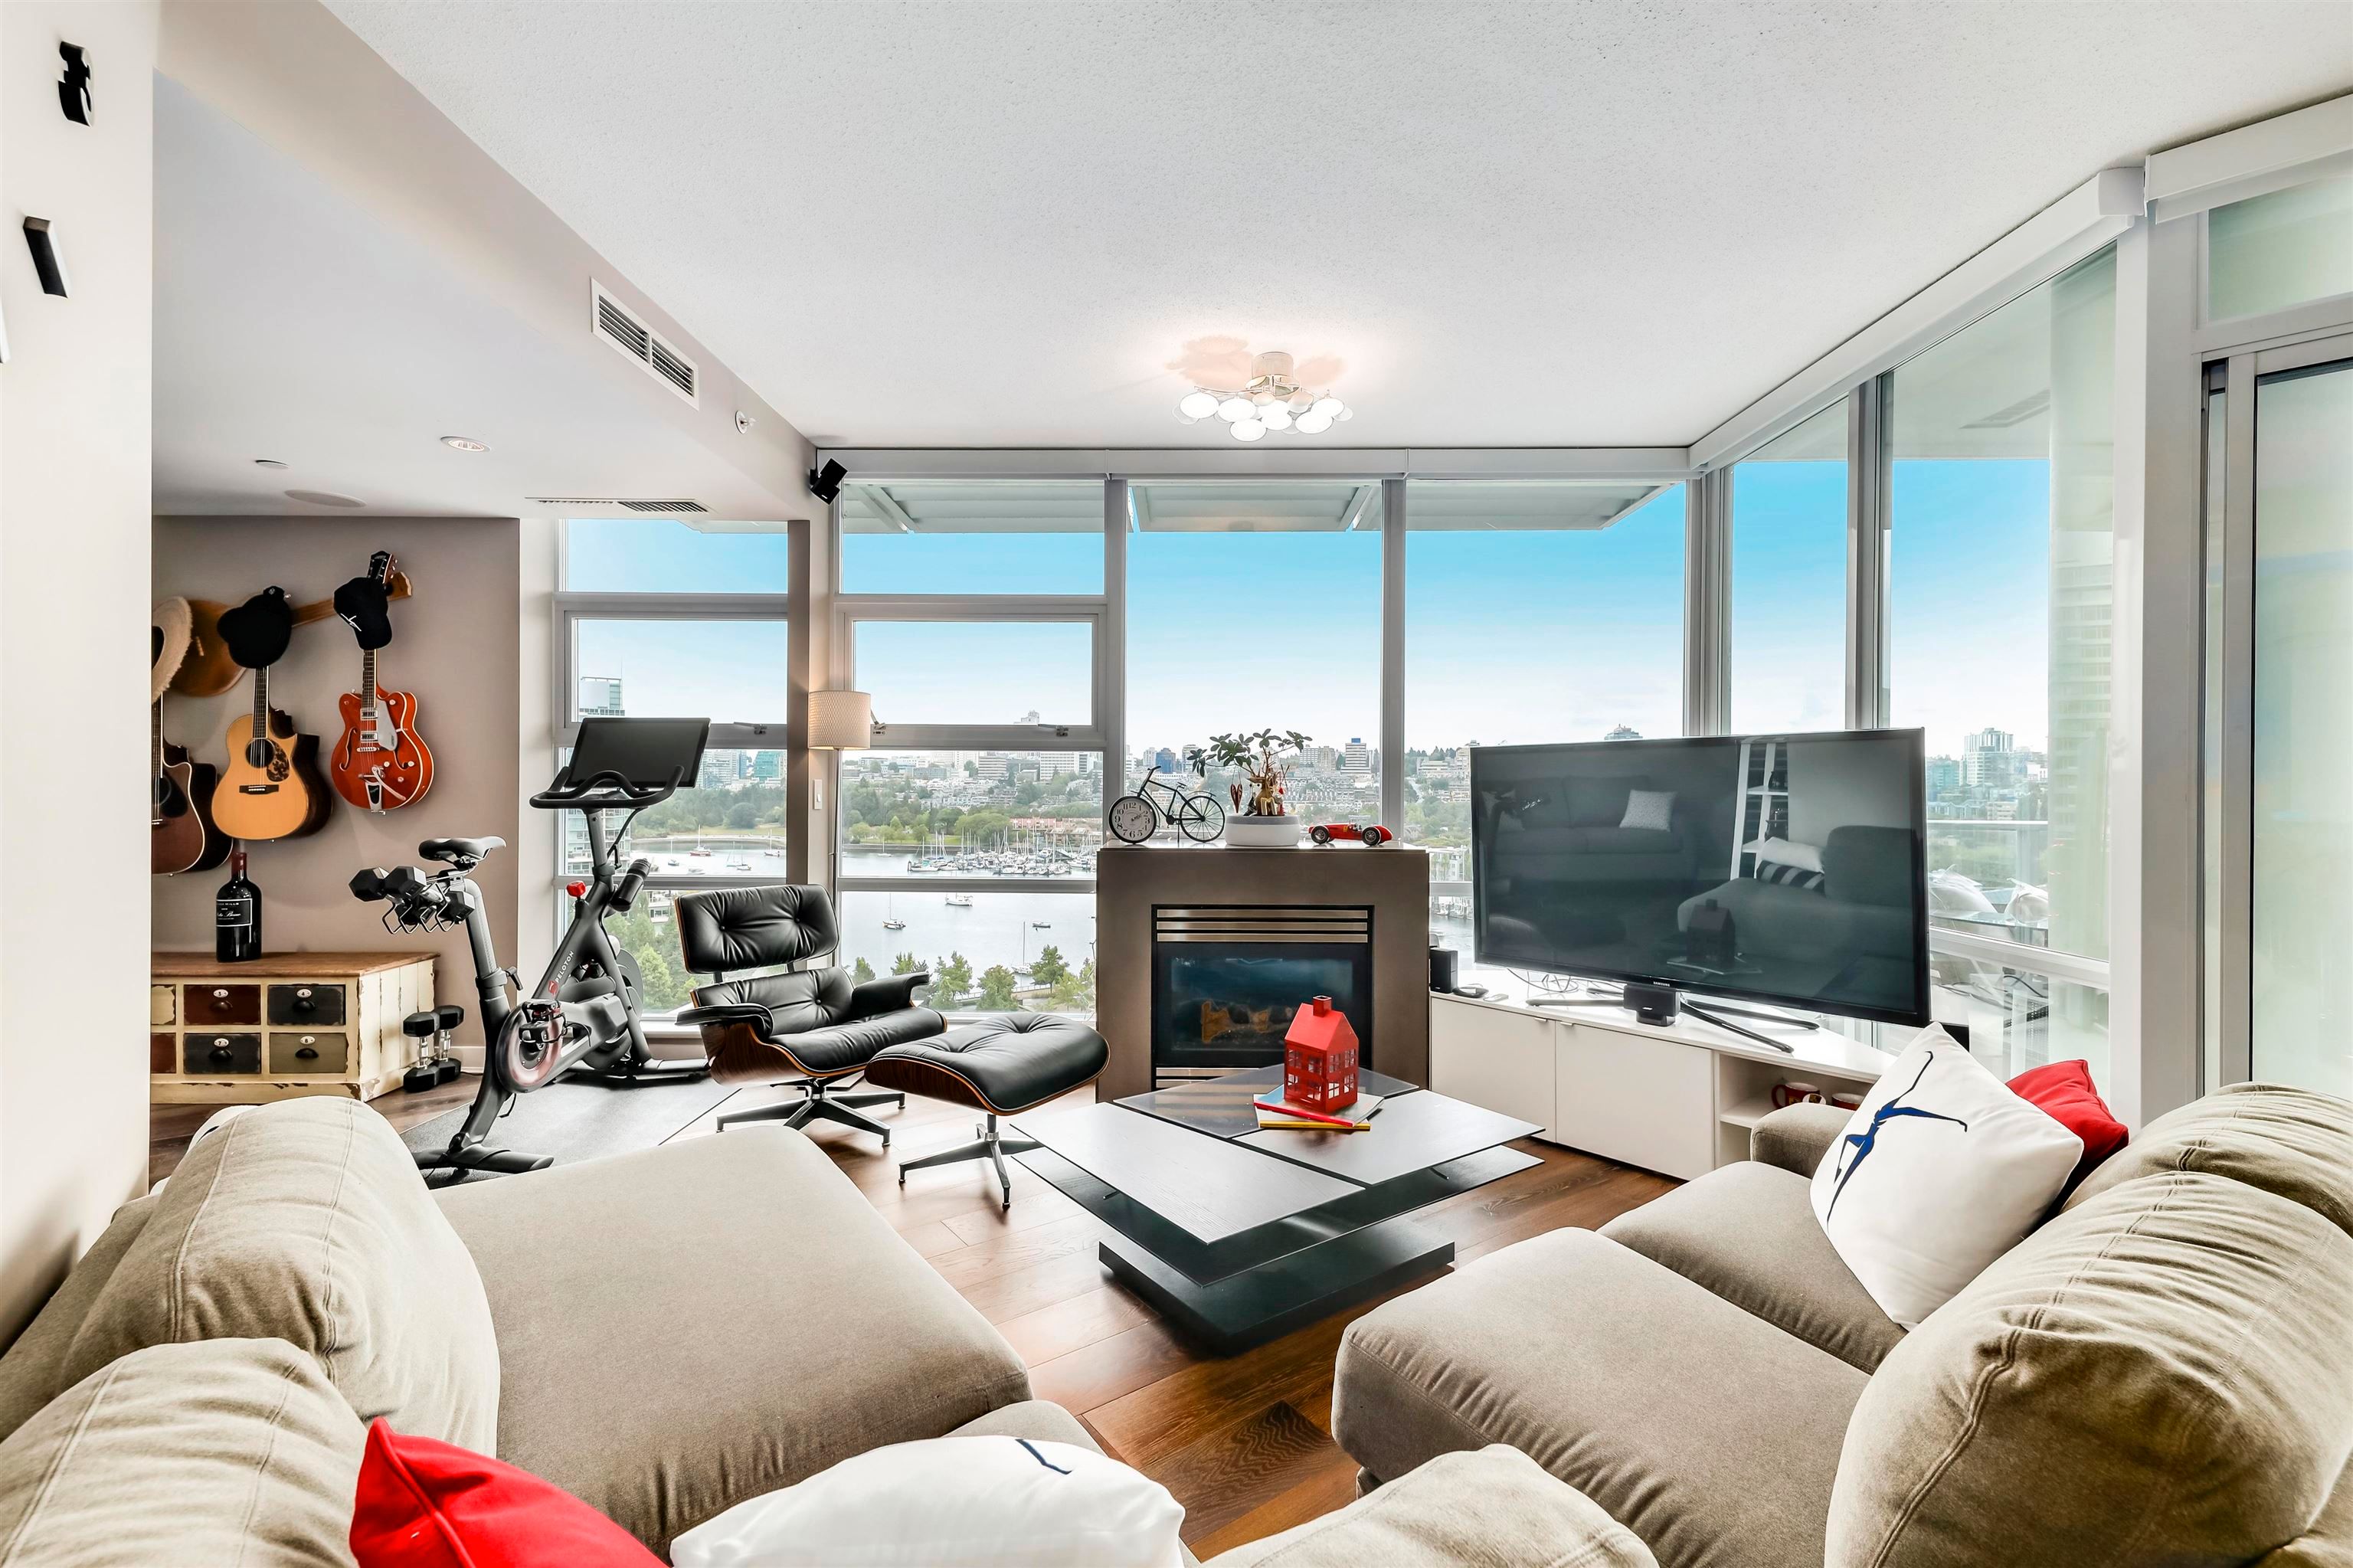 Main Photo: 1502 638 BEACH CRESCENT in Vancouver: Yaletown Condo for sale (Vancouver West)  : MLS®# R2642568